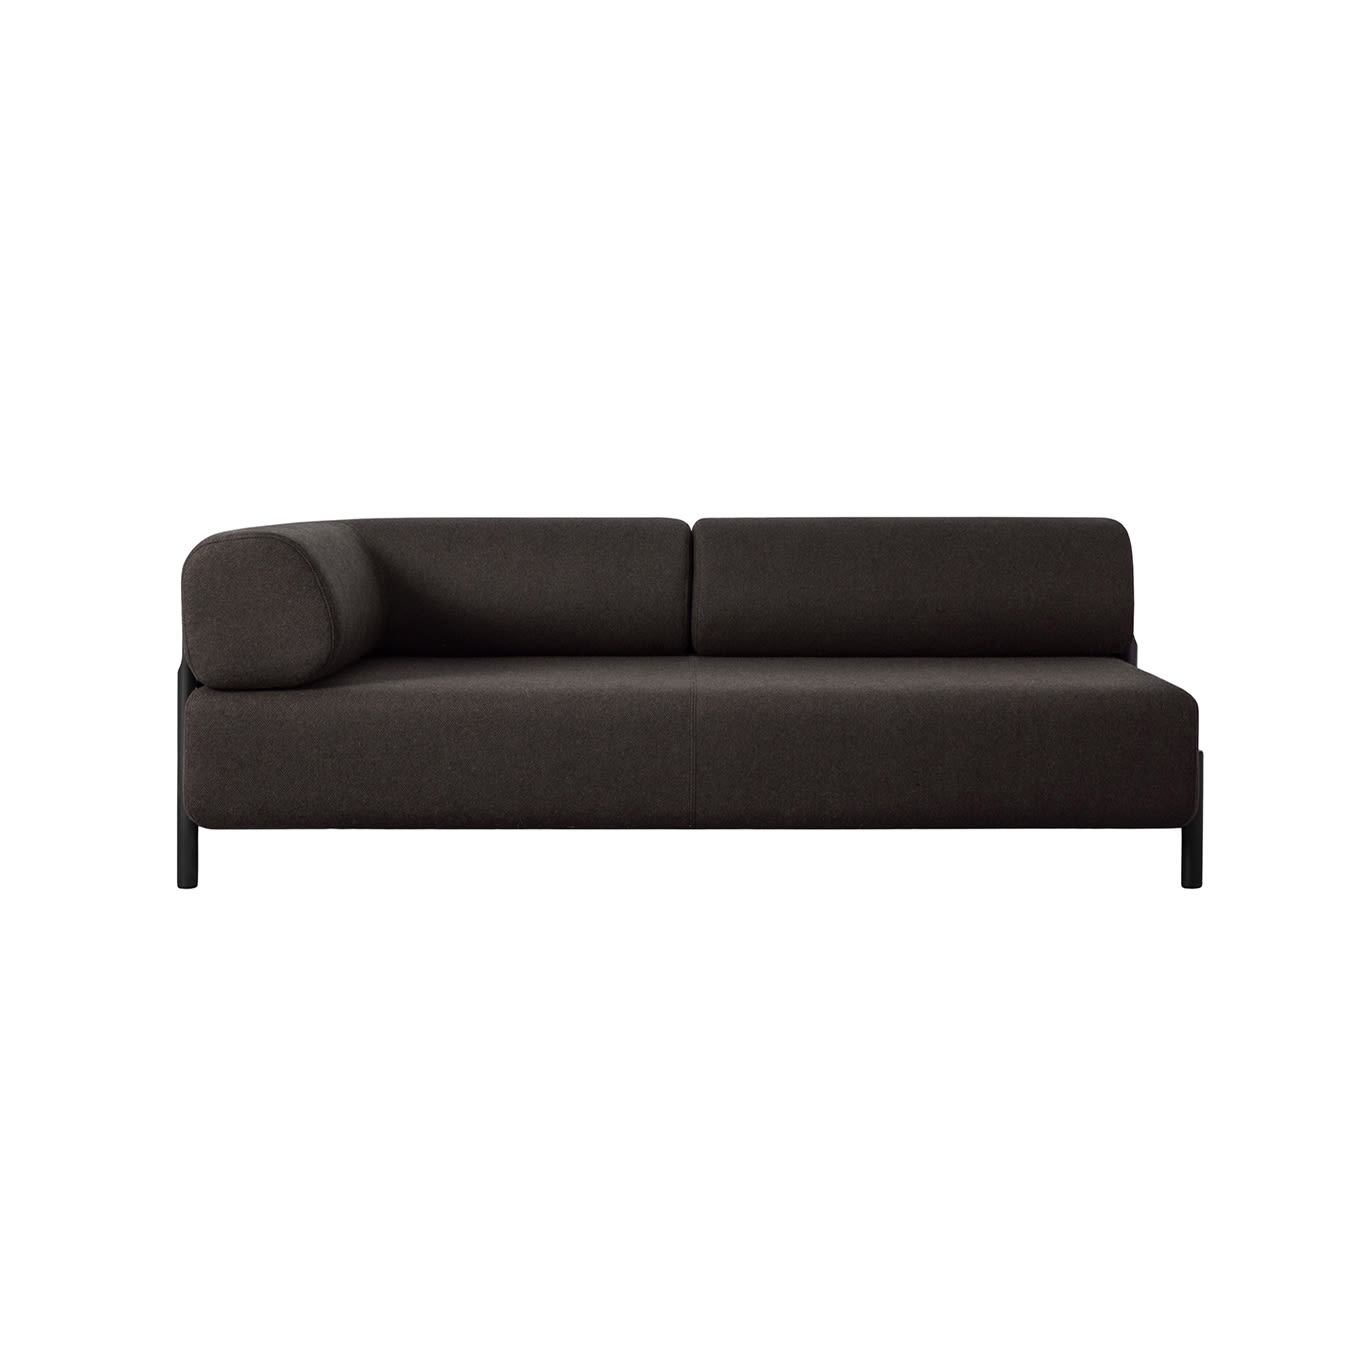 2-seater Sofa Chaise Left, Brown-Black